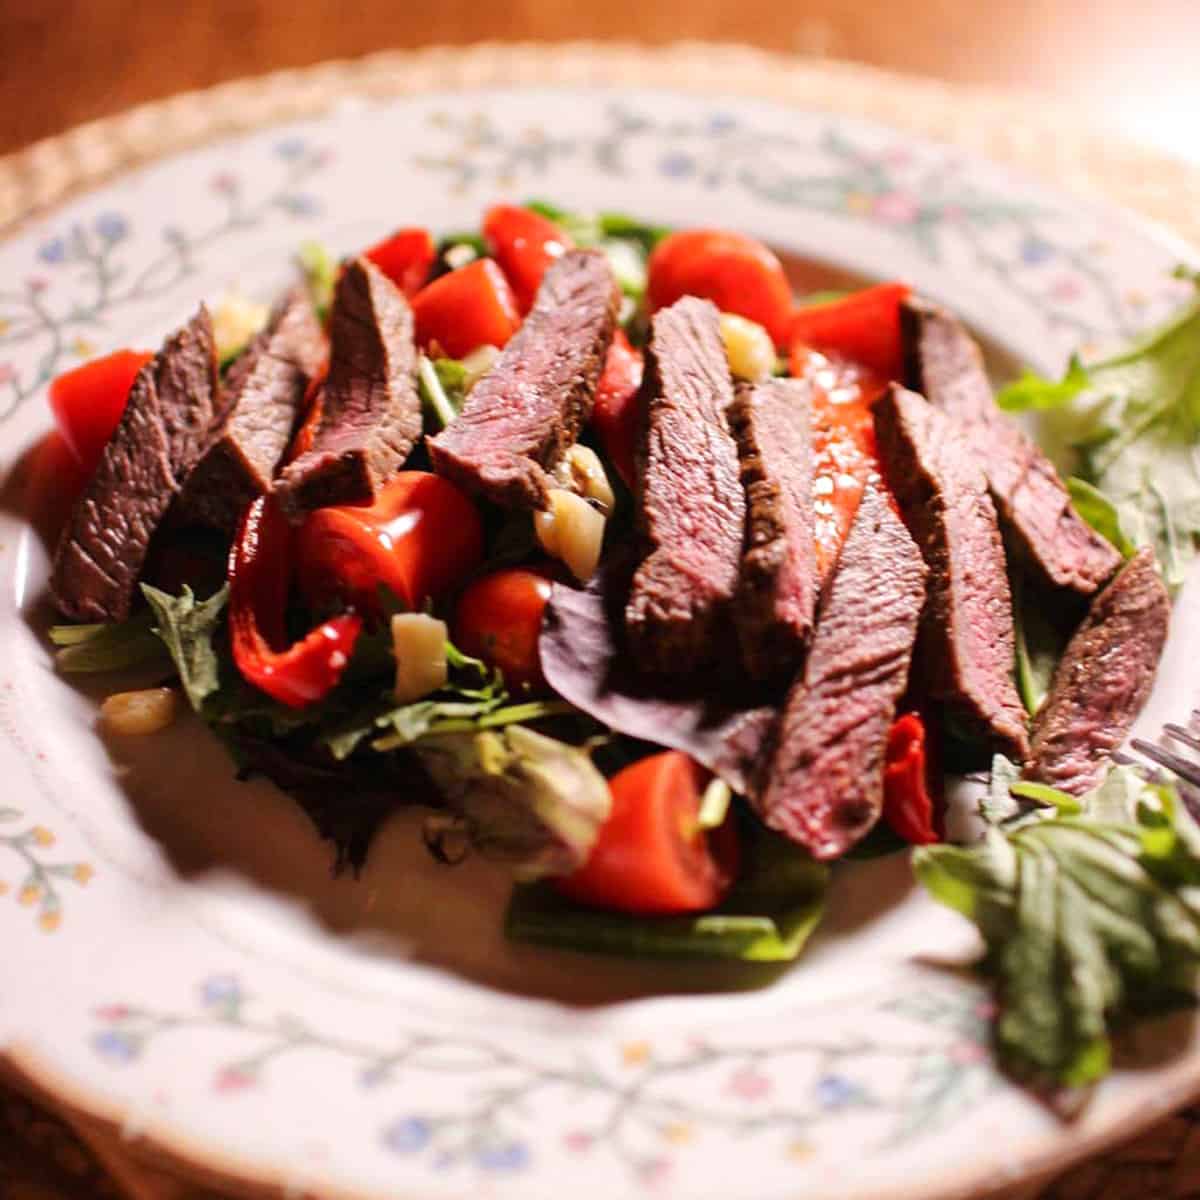 a small salad topped with strips of steak.